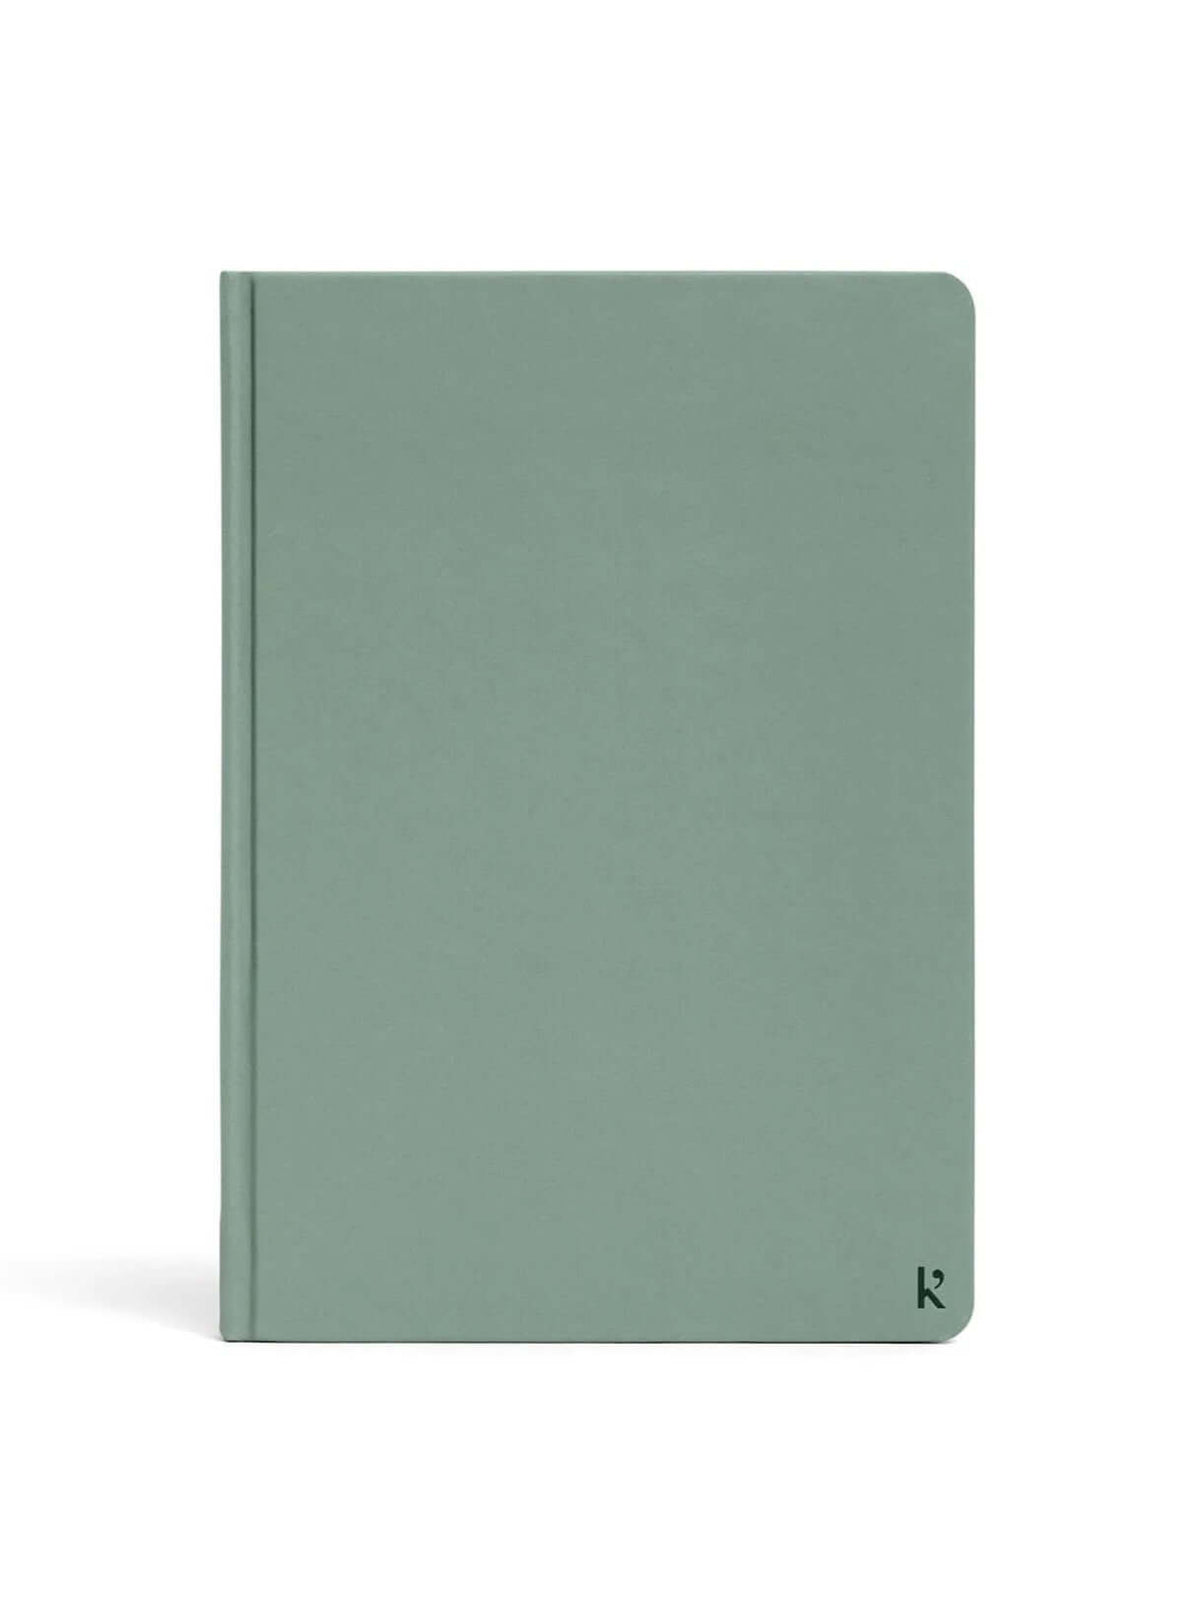 Front cover in Eucalypt green